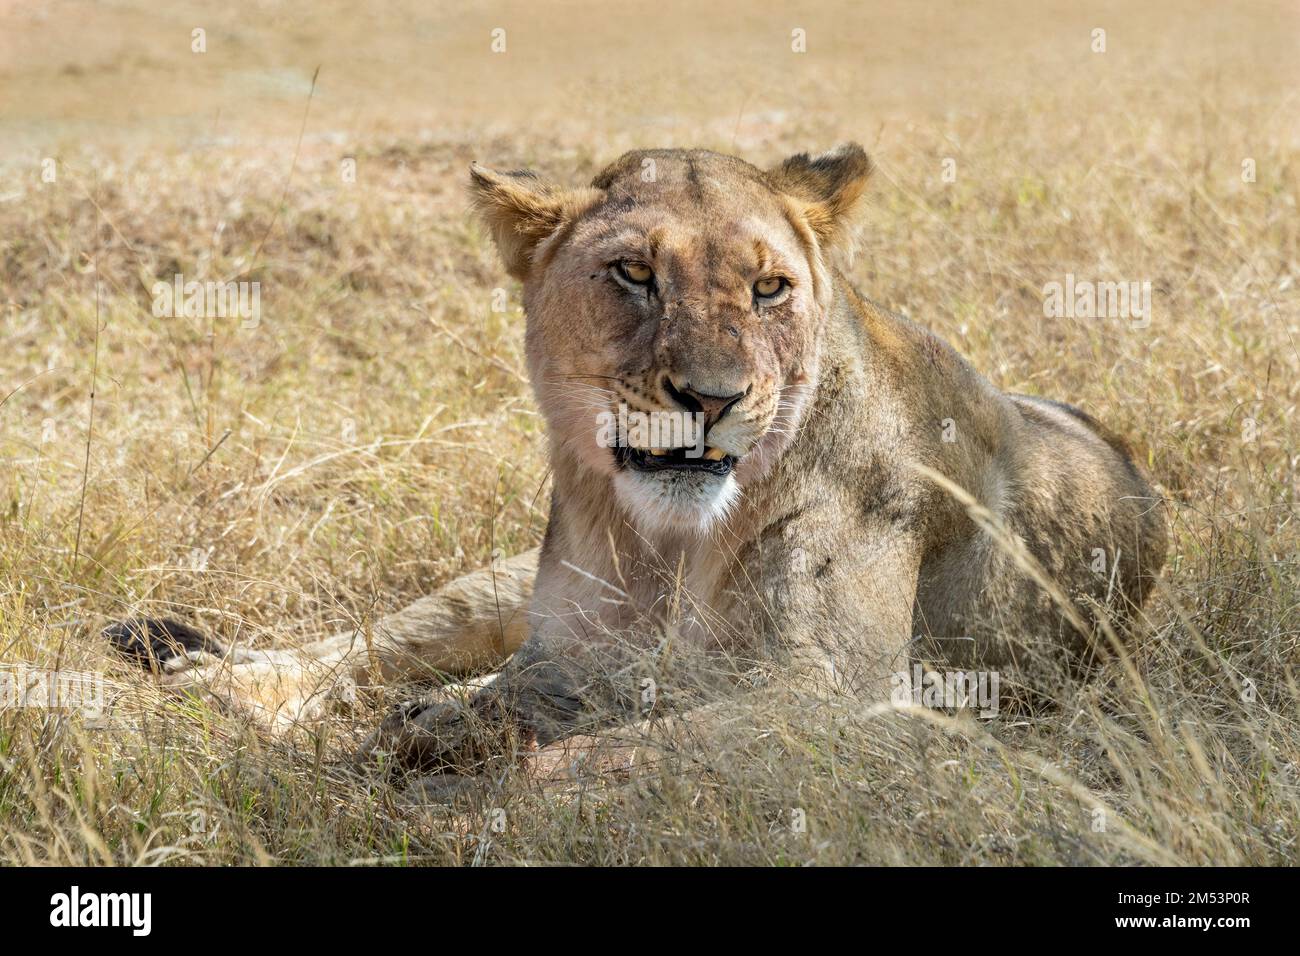 Lioness resting in the dried grasses, Mabula, South Africa Stock Photo